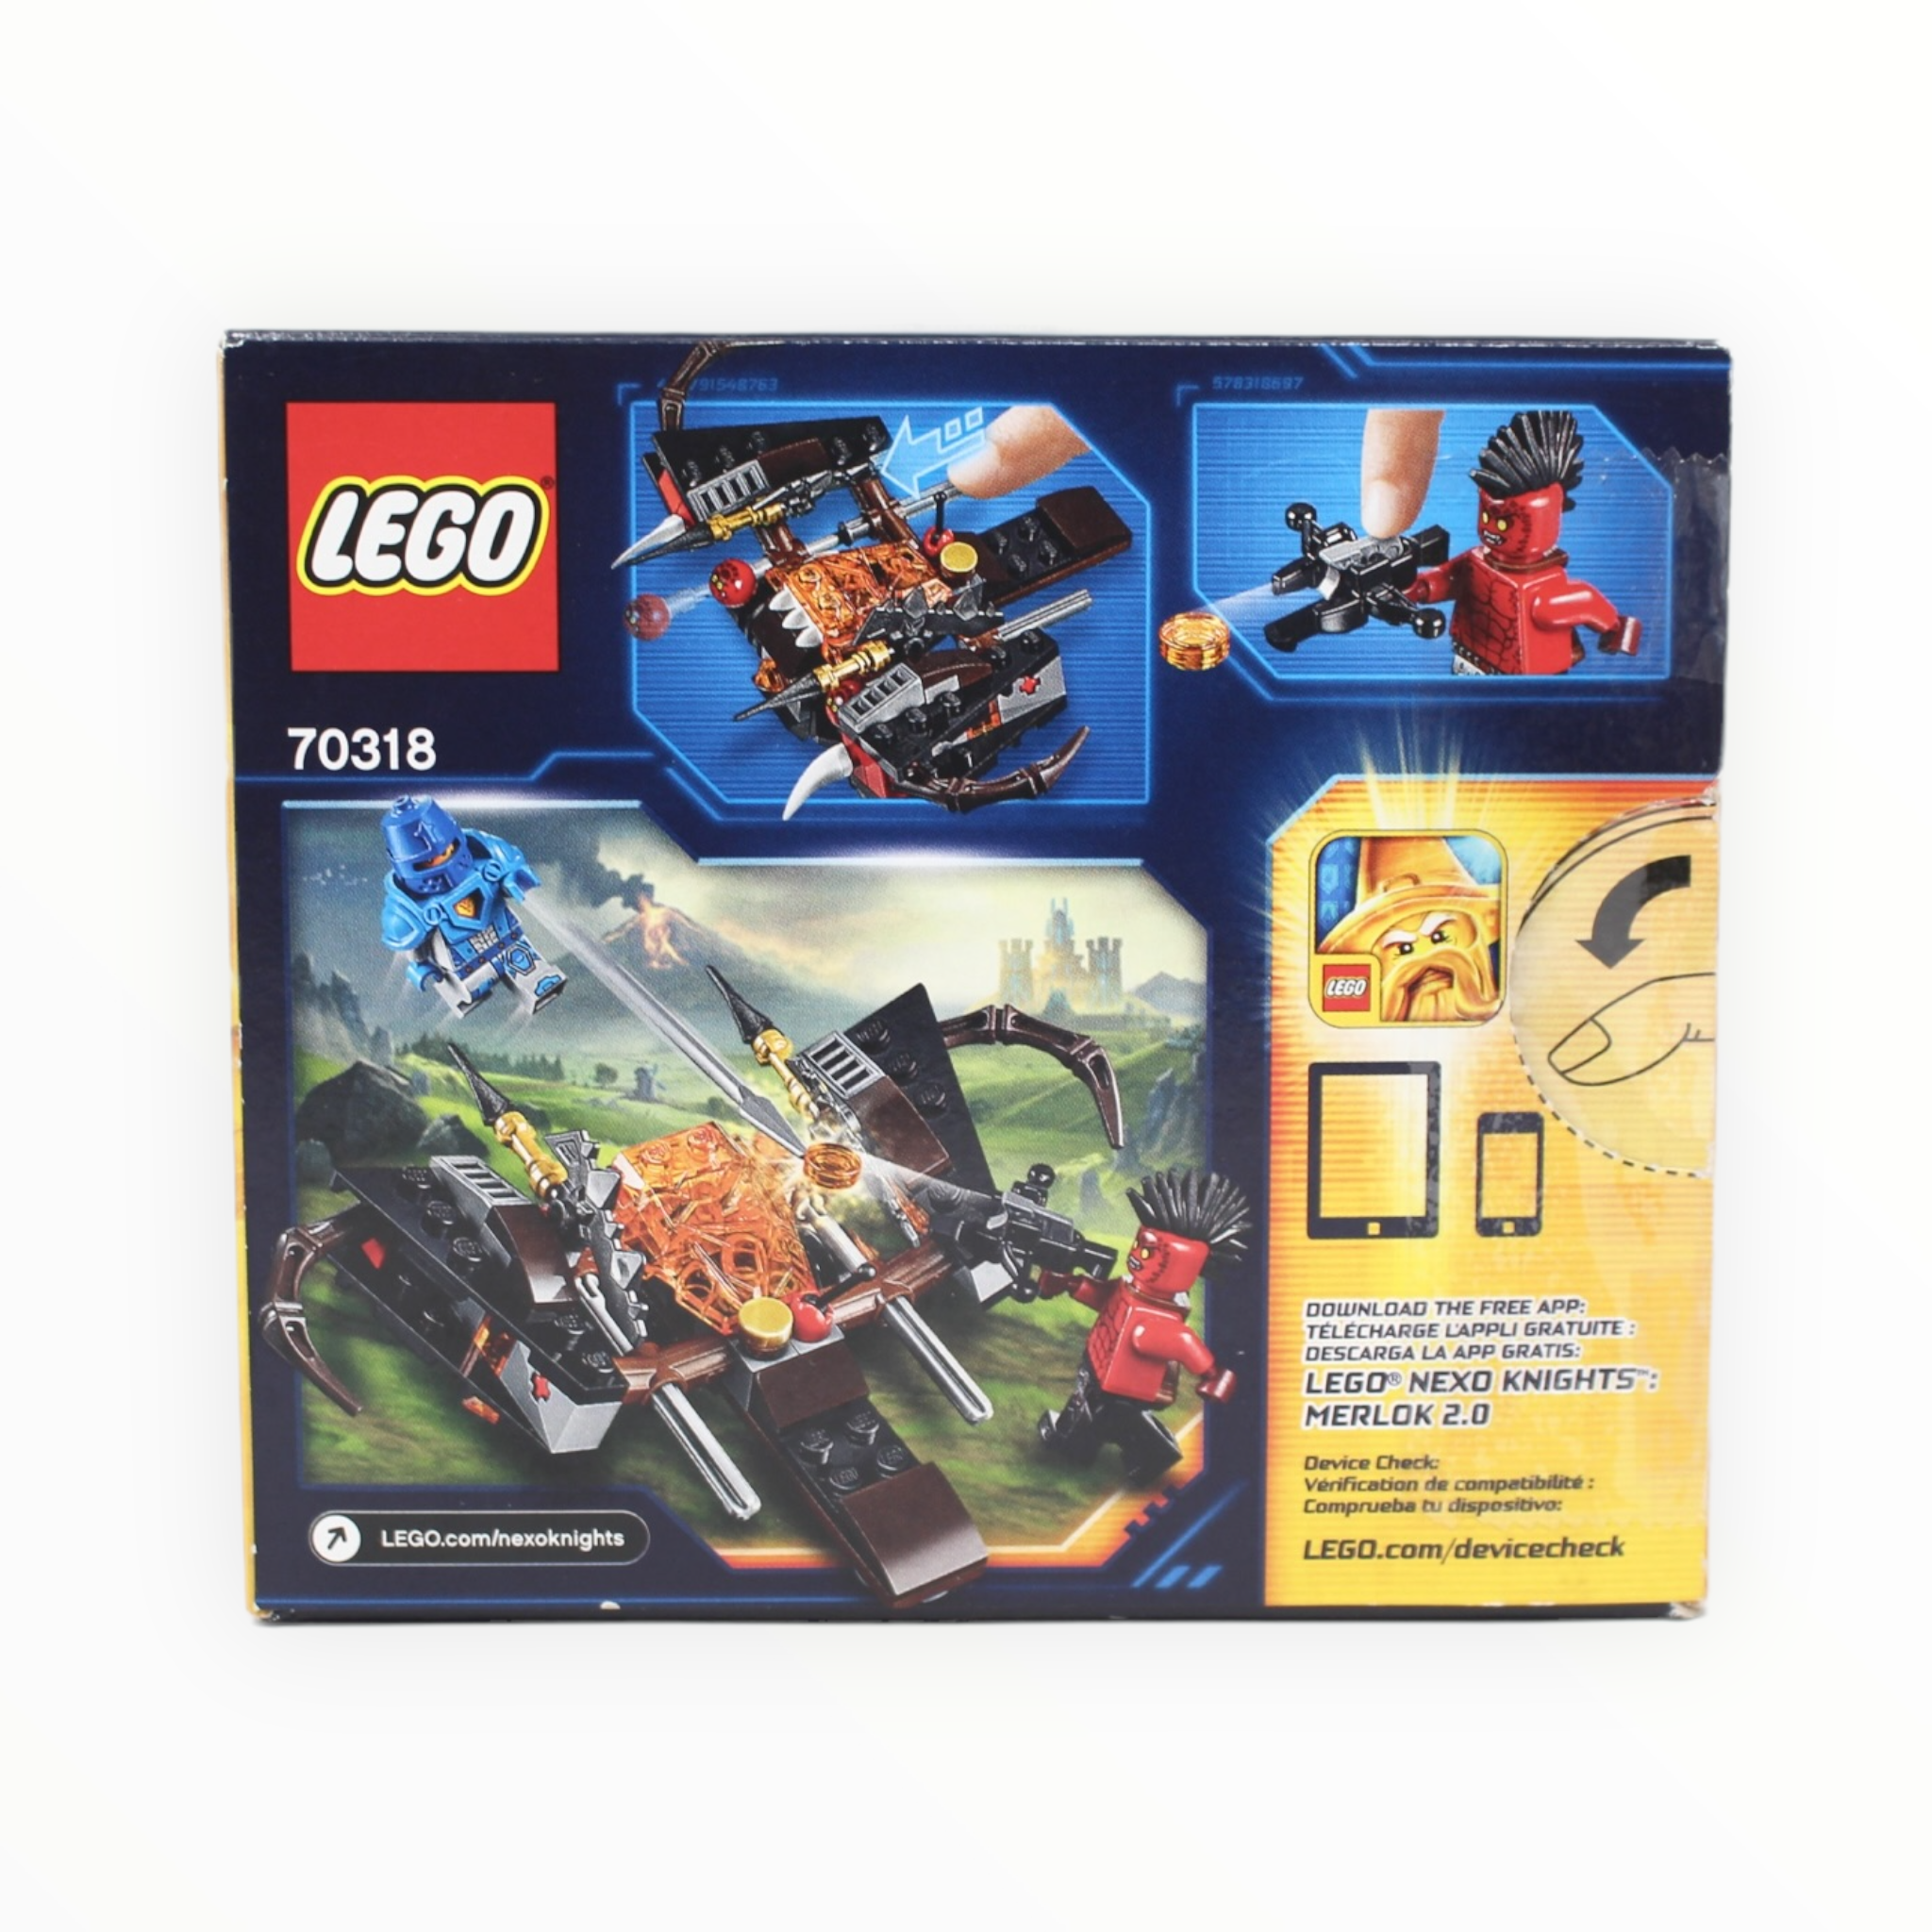 Certified Used Set 70318 Nexo Knights The Glob Lobber